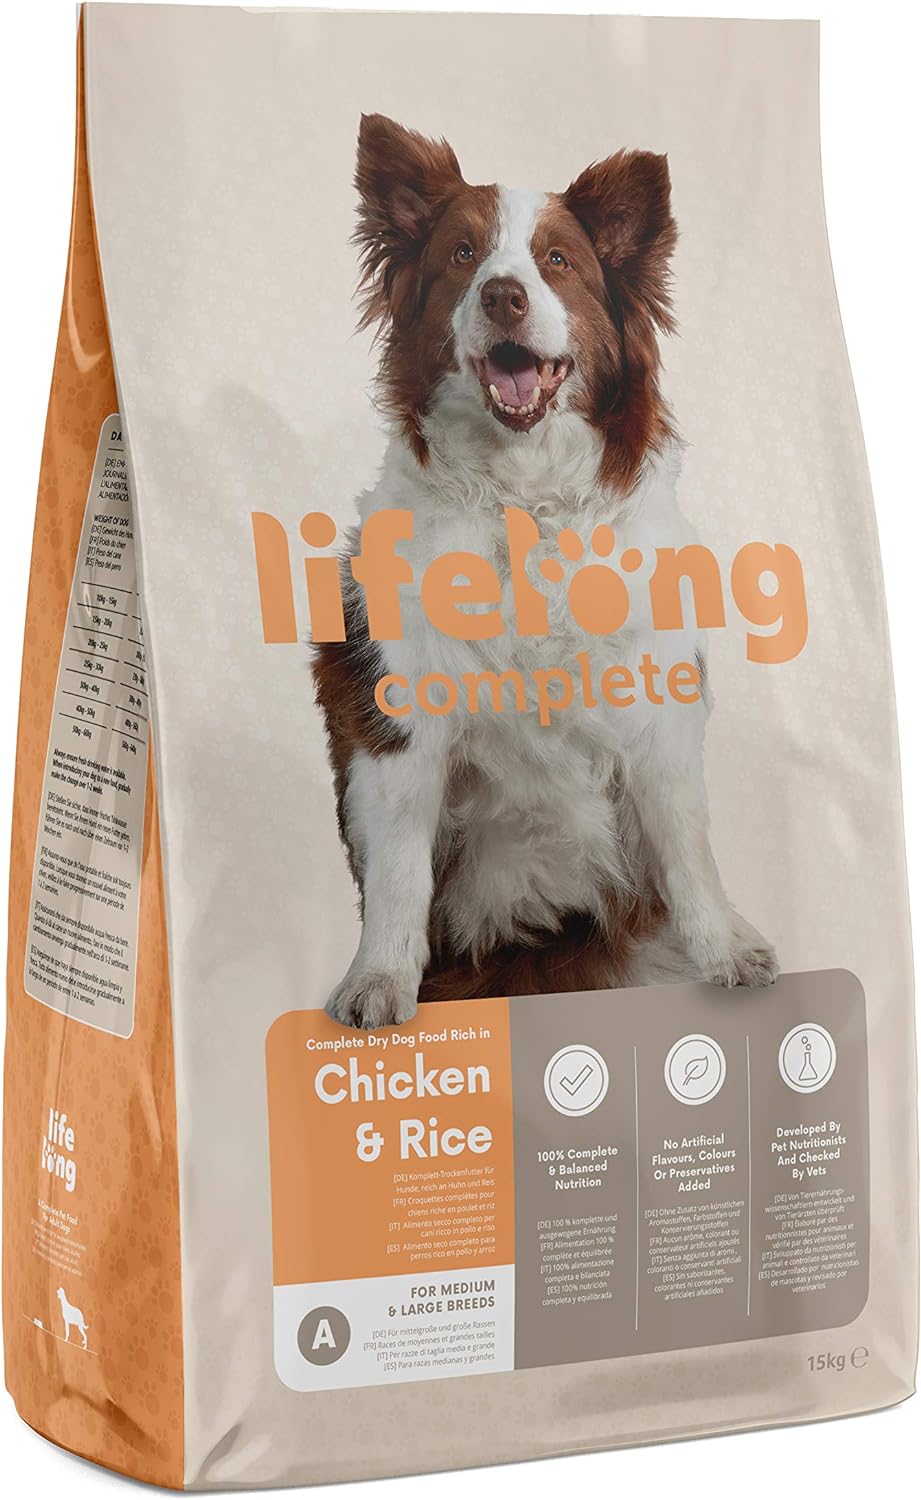 Amazon Brand - Lifelong - Complete Dry Dog Food Rich in Chicken & Rice For Medium and Large Breeds, 1 Pack of 15kg?ESP50062005